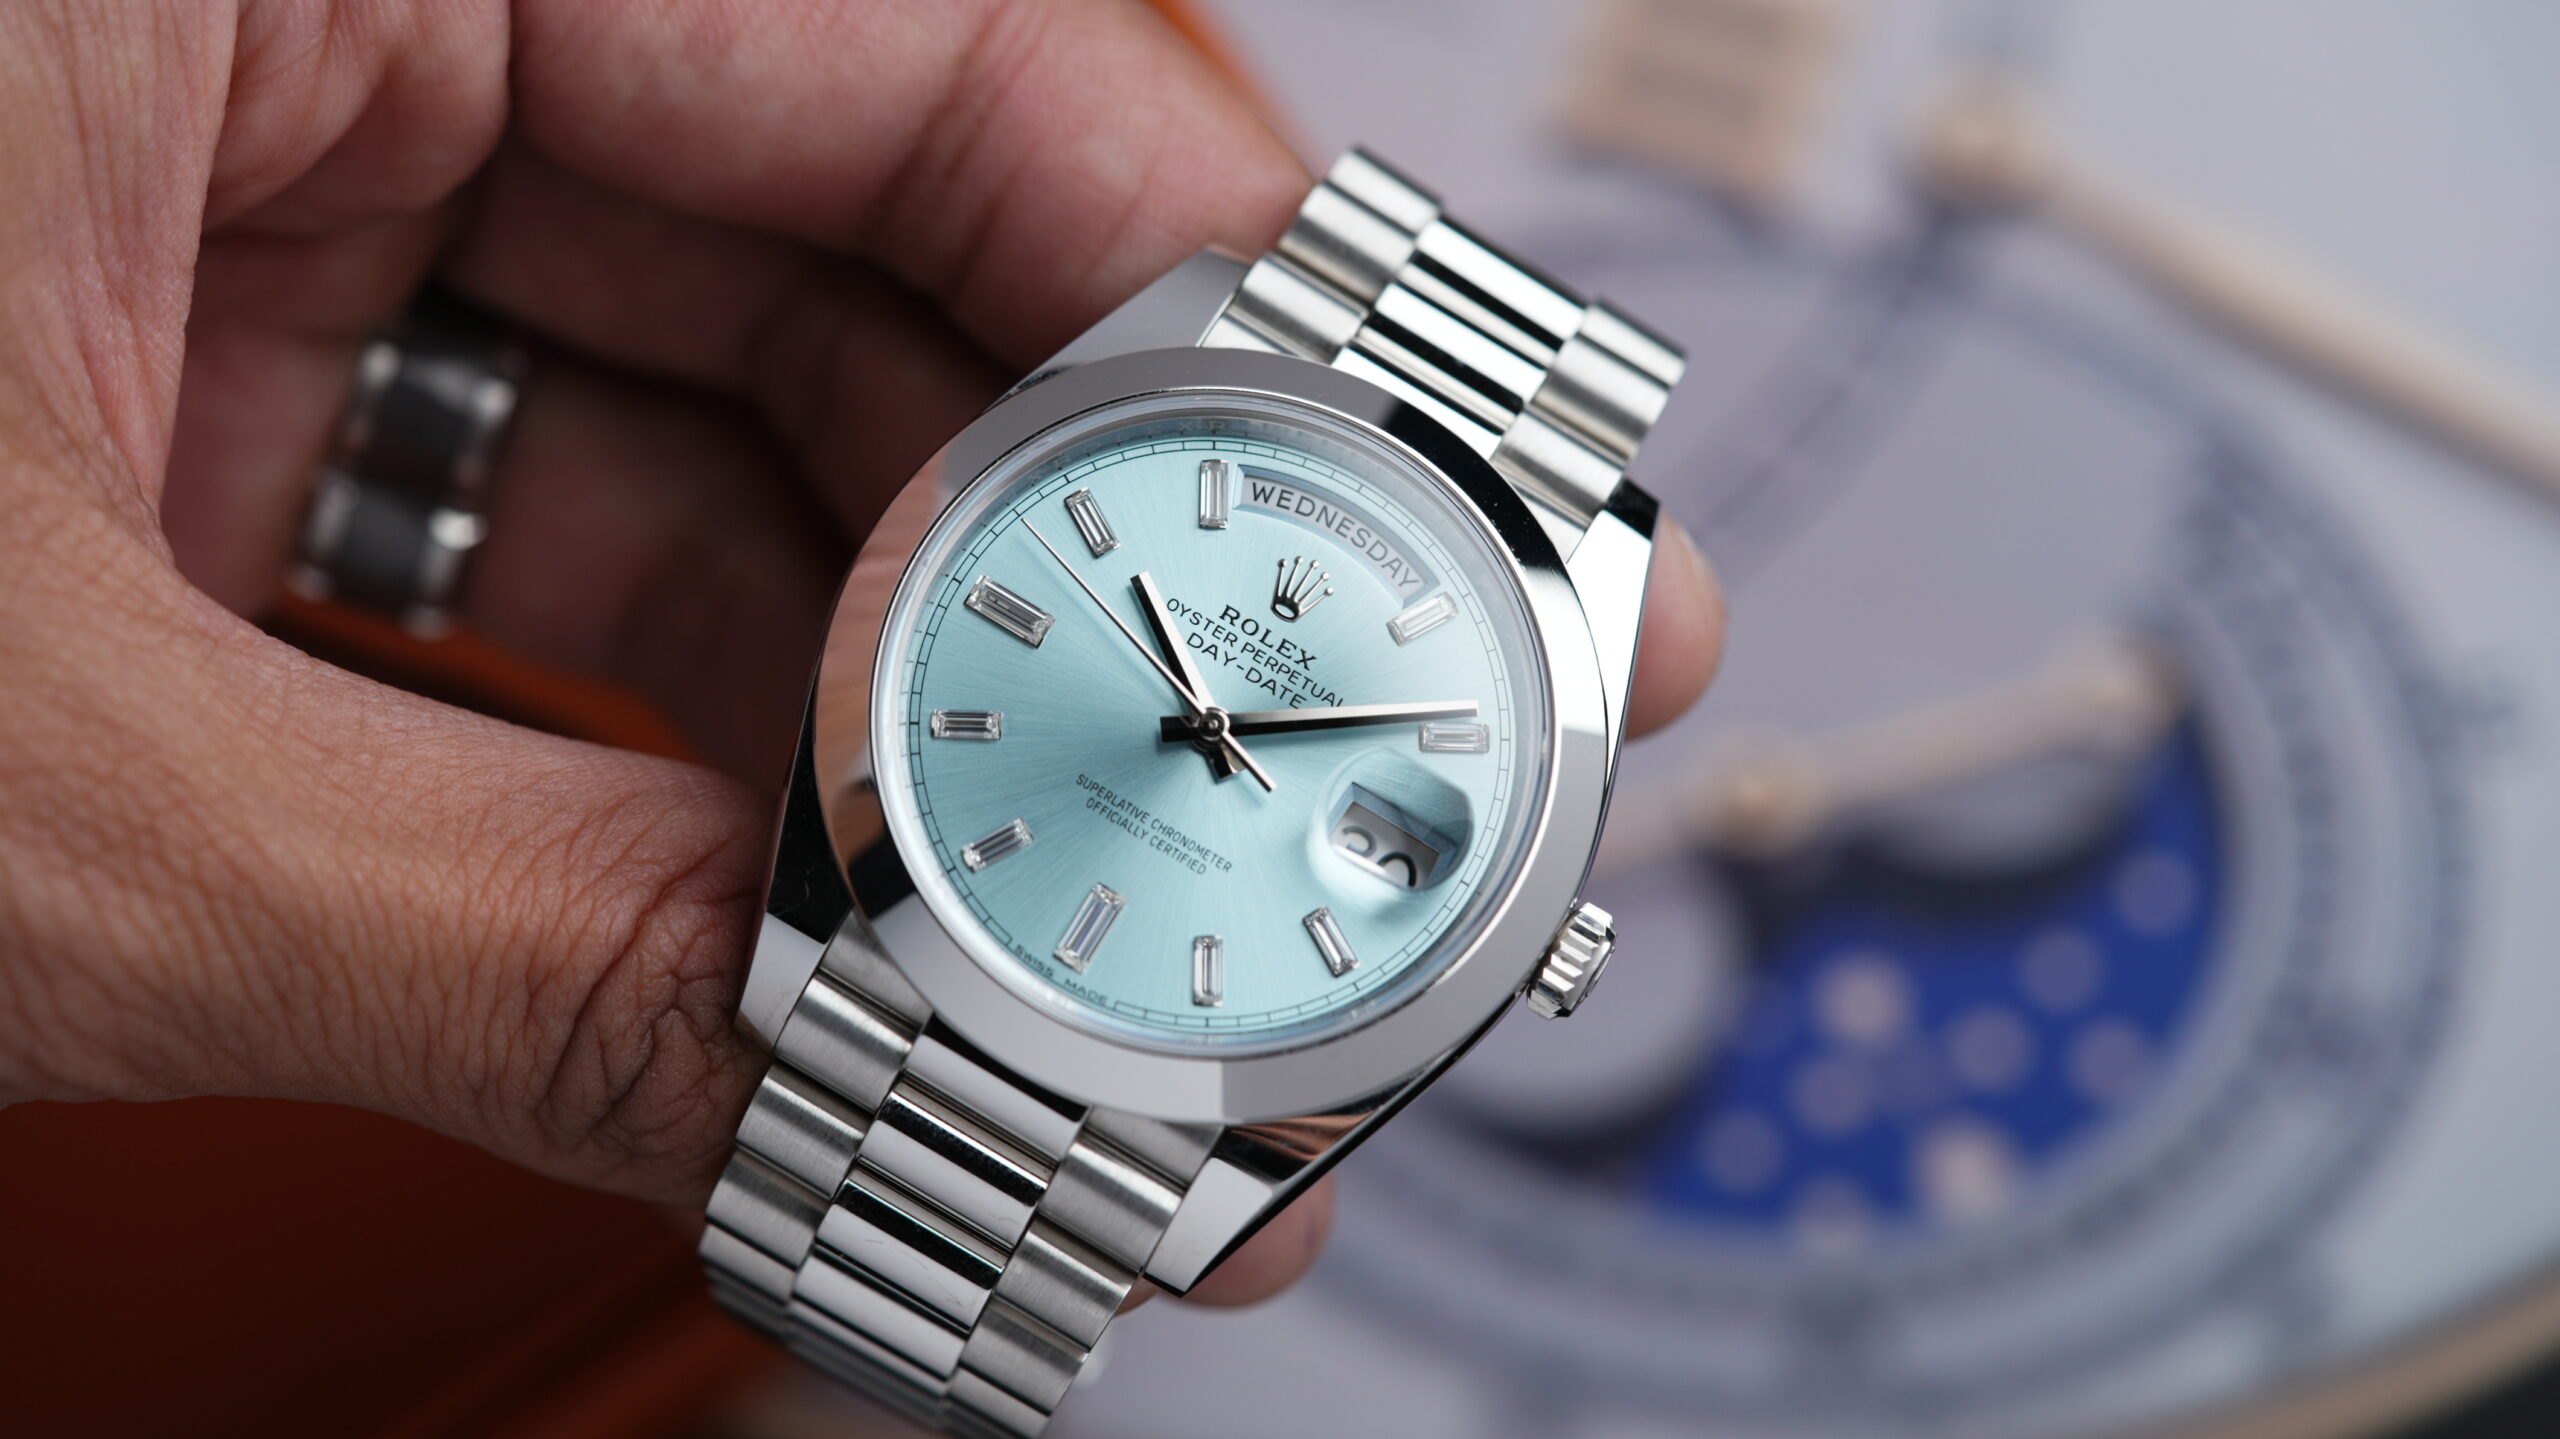 Rolex Day Date Ice Blue Watches - Luxury Watches USA